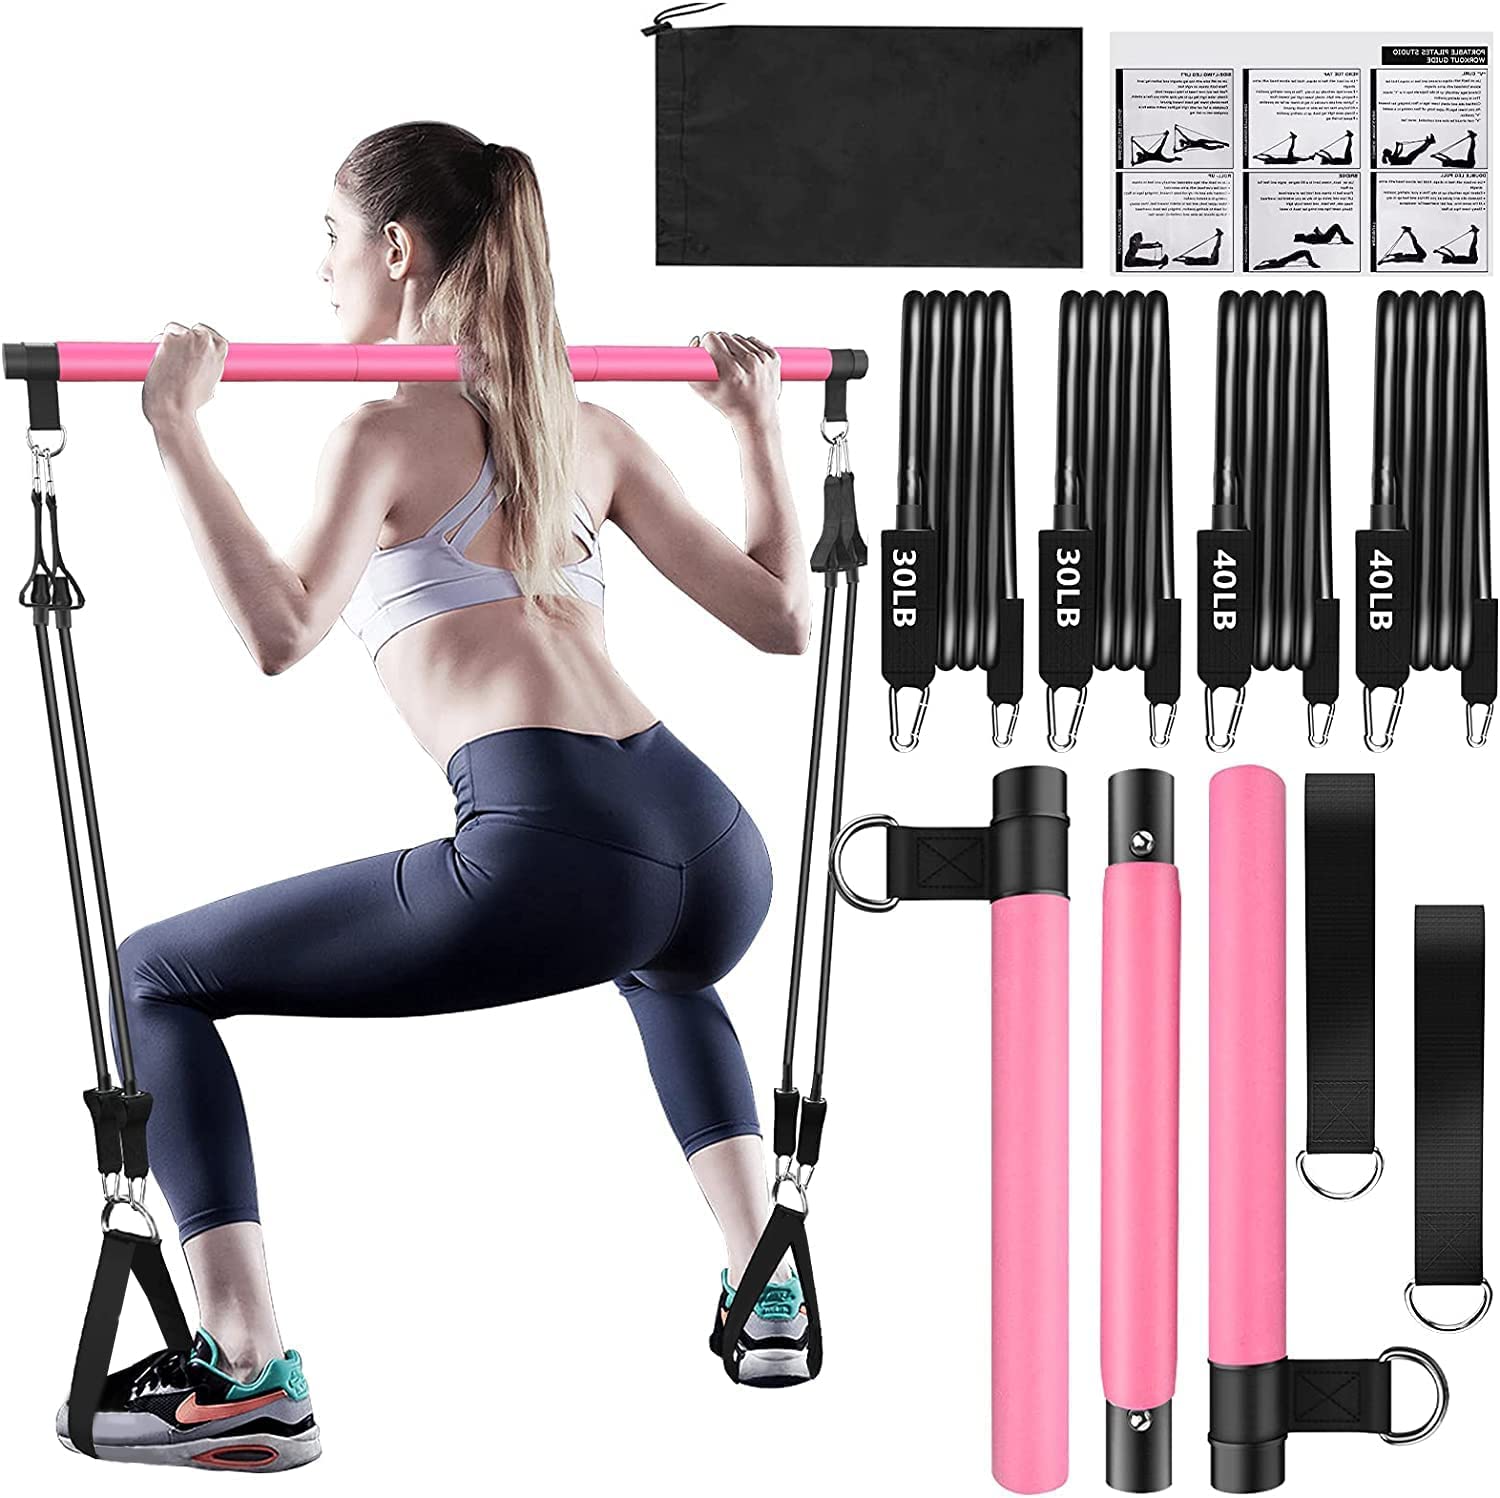 NEW START SYSTEMS - Pilates Bar Kit with Resistance Bands [3 Pairs] -  Innovative 3 Section Pilate Bar